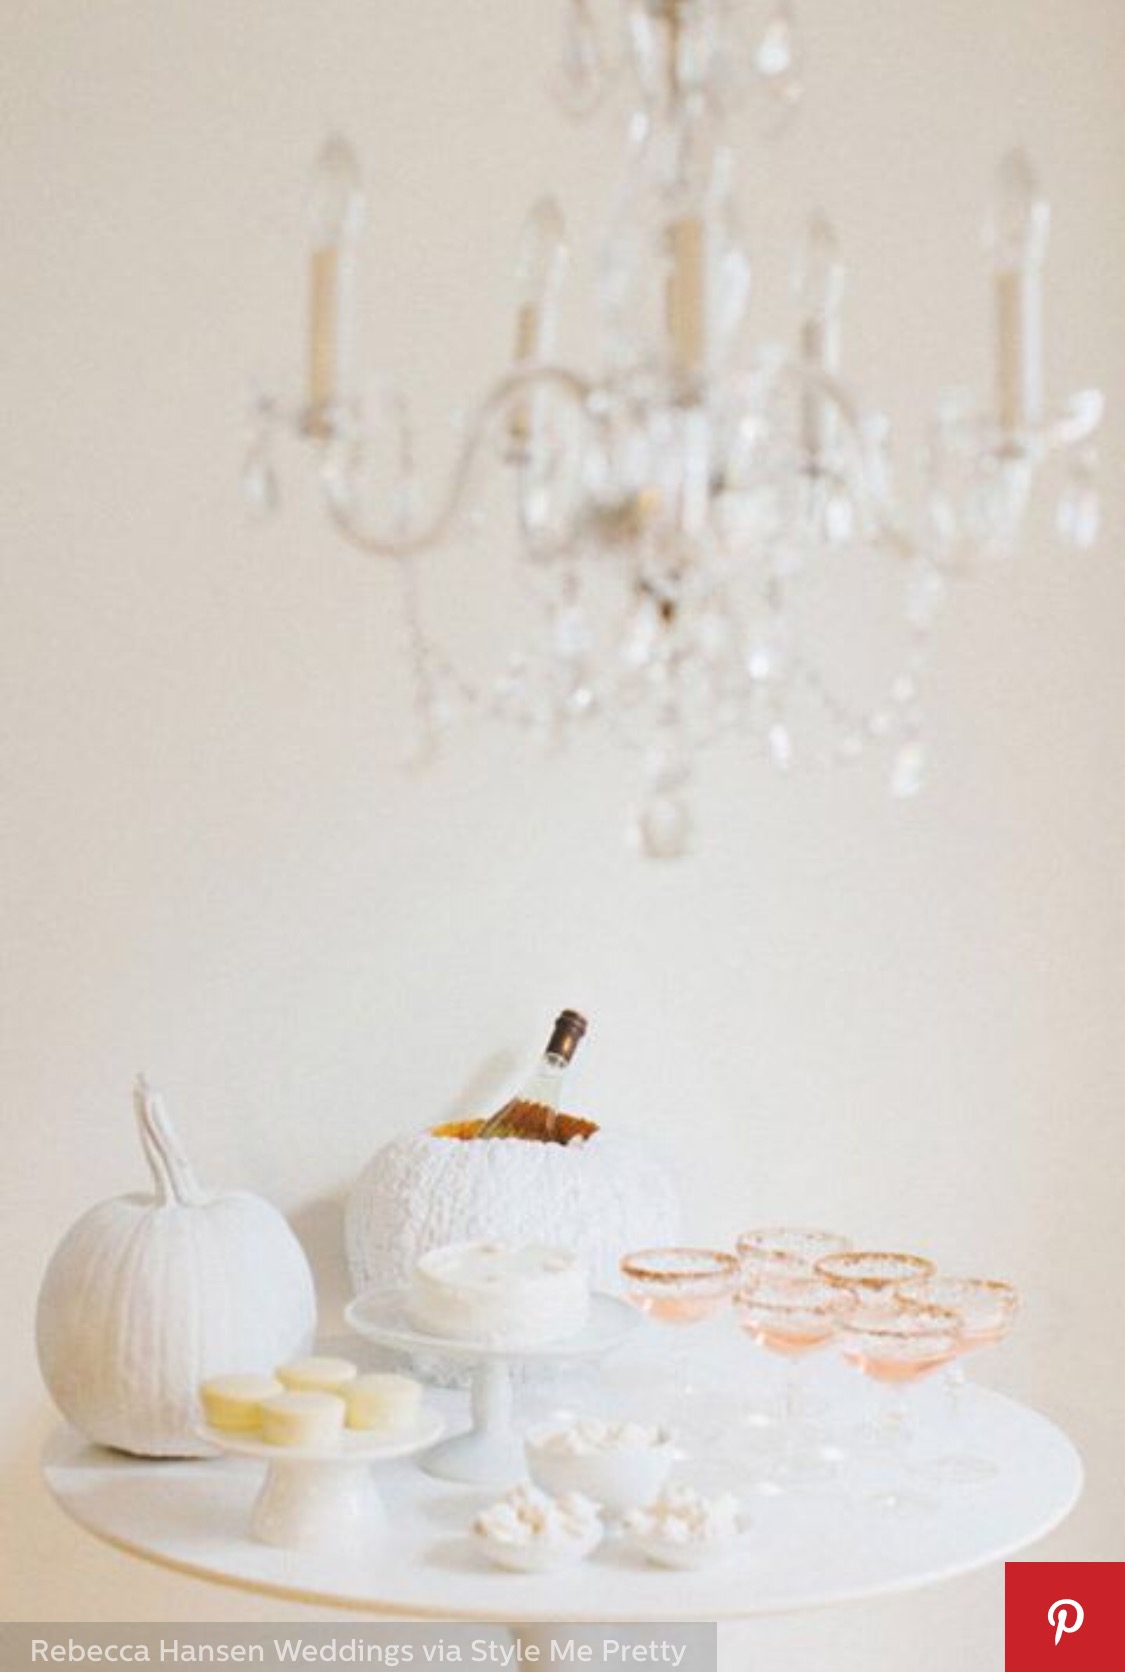 How to decorate for Halloween the Slay way